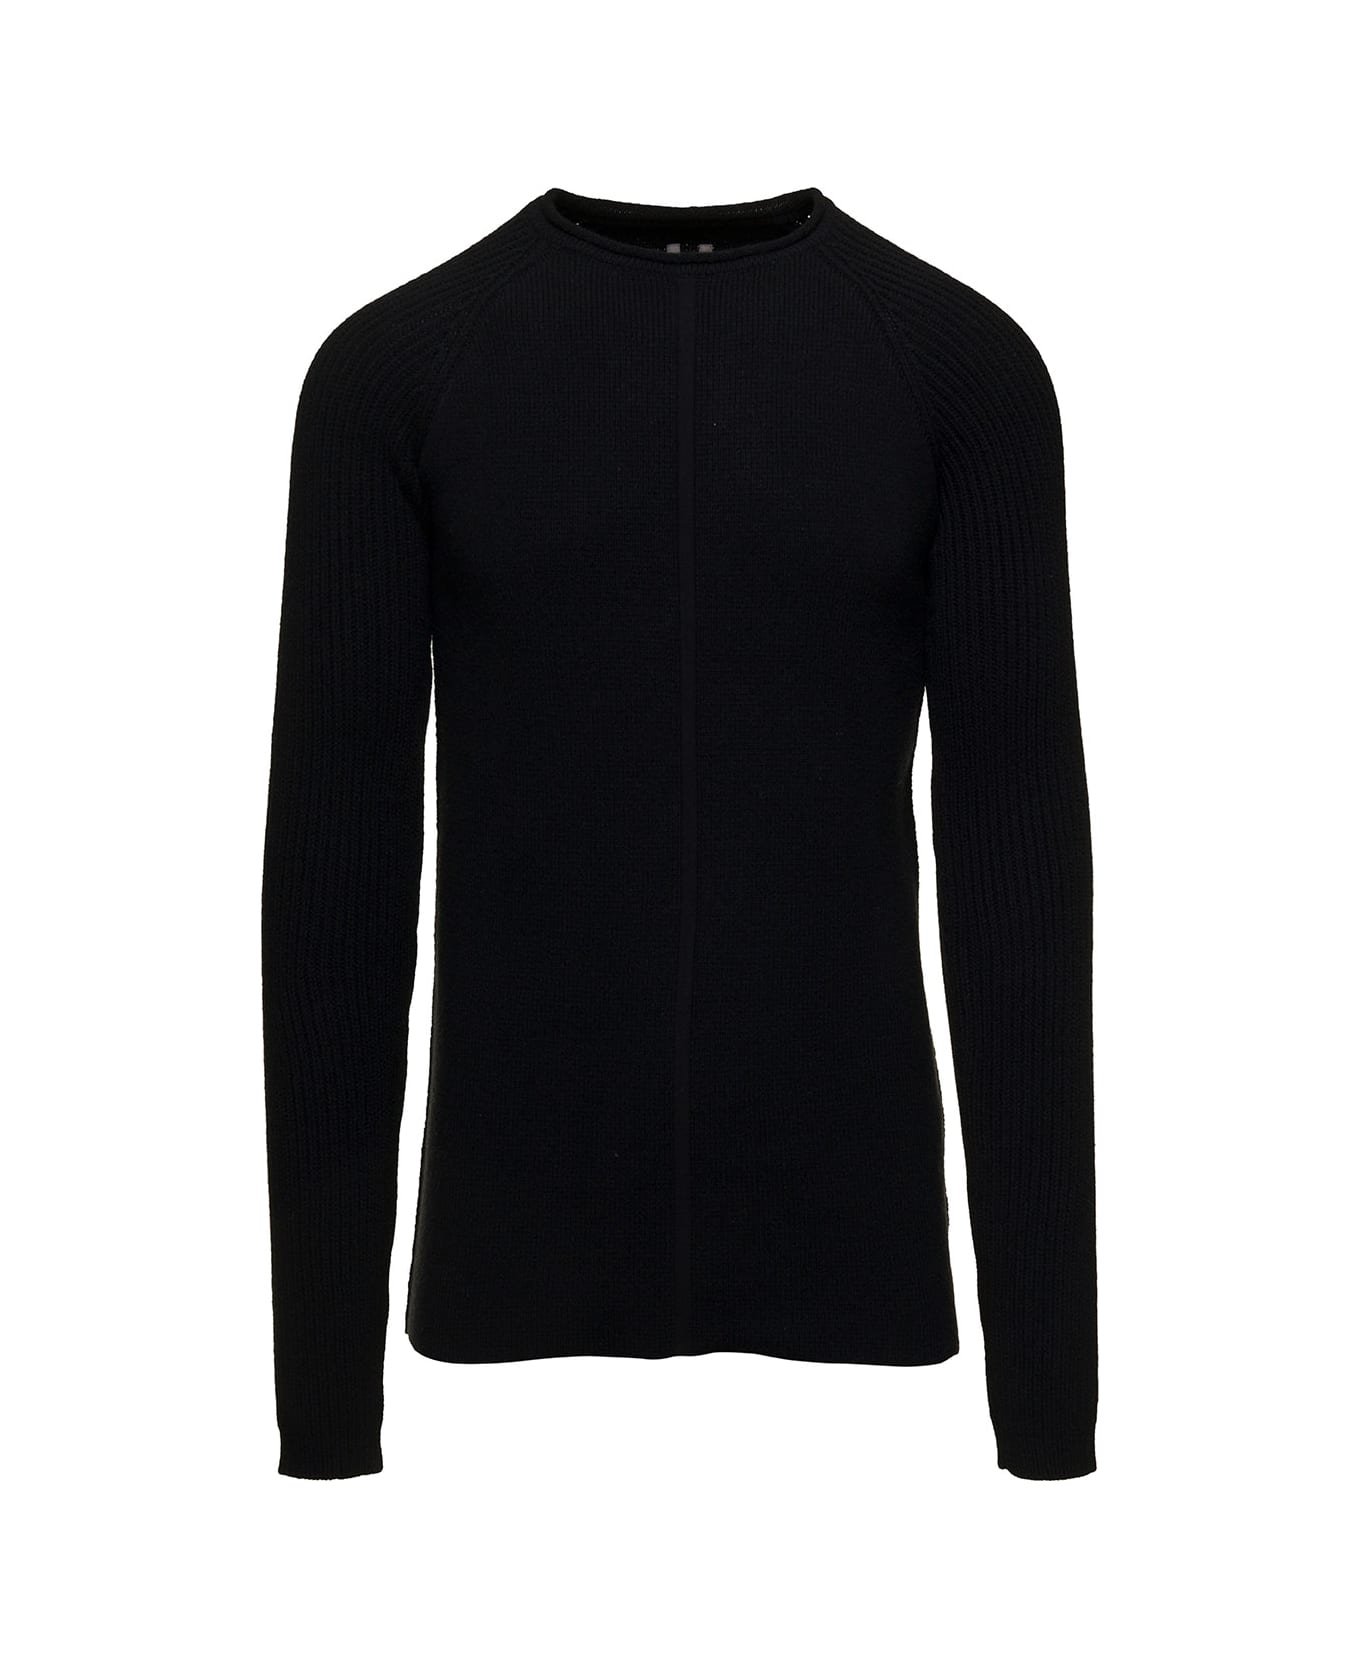 Rick Owens Black Long Sleeve Top With Crewneck In Cashmere And Wool Man - Black